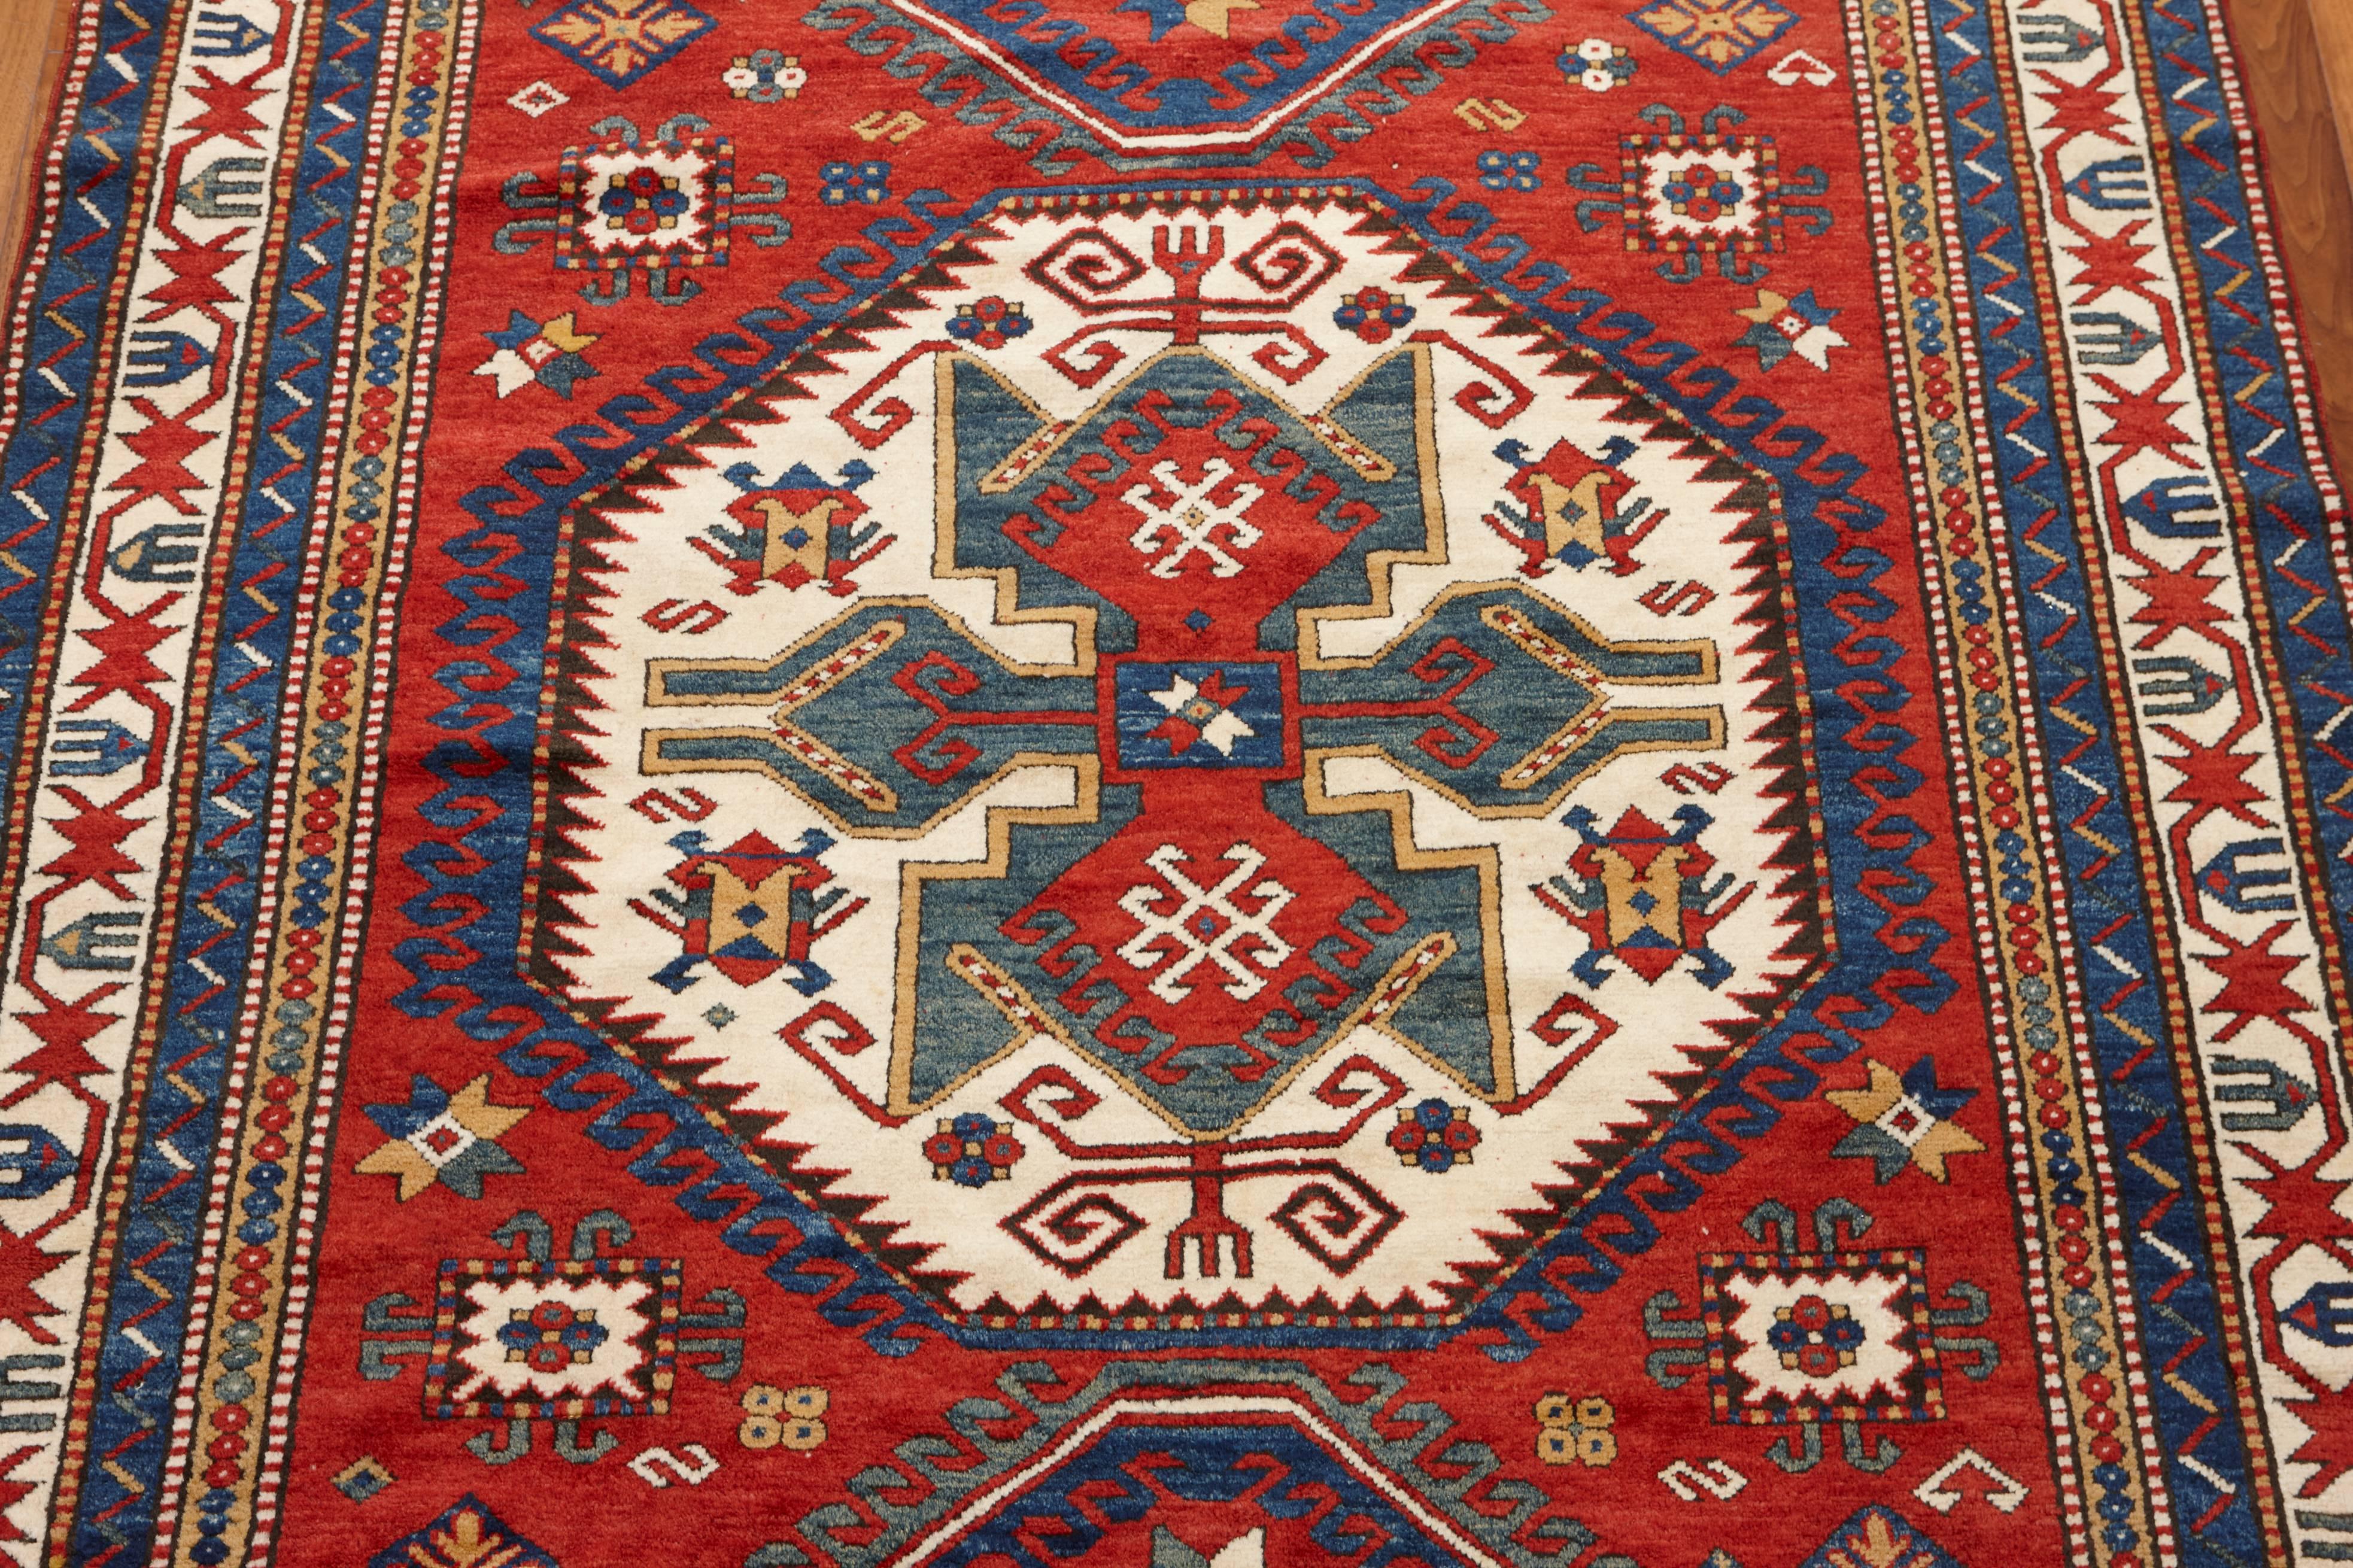 Lori Pambak rugs are some of the most sought-after Caucasian rugs. Woven in the mountainous Lori region of Armenia, rugs from these region are most renowned for their cruciform octagonal shield designs. The most notable of these rugs have rich